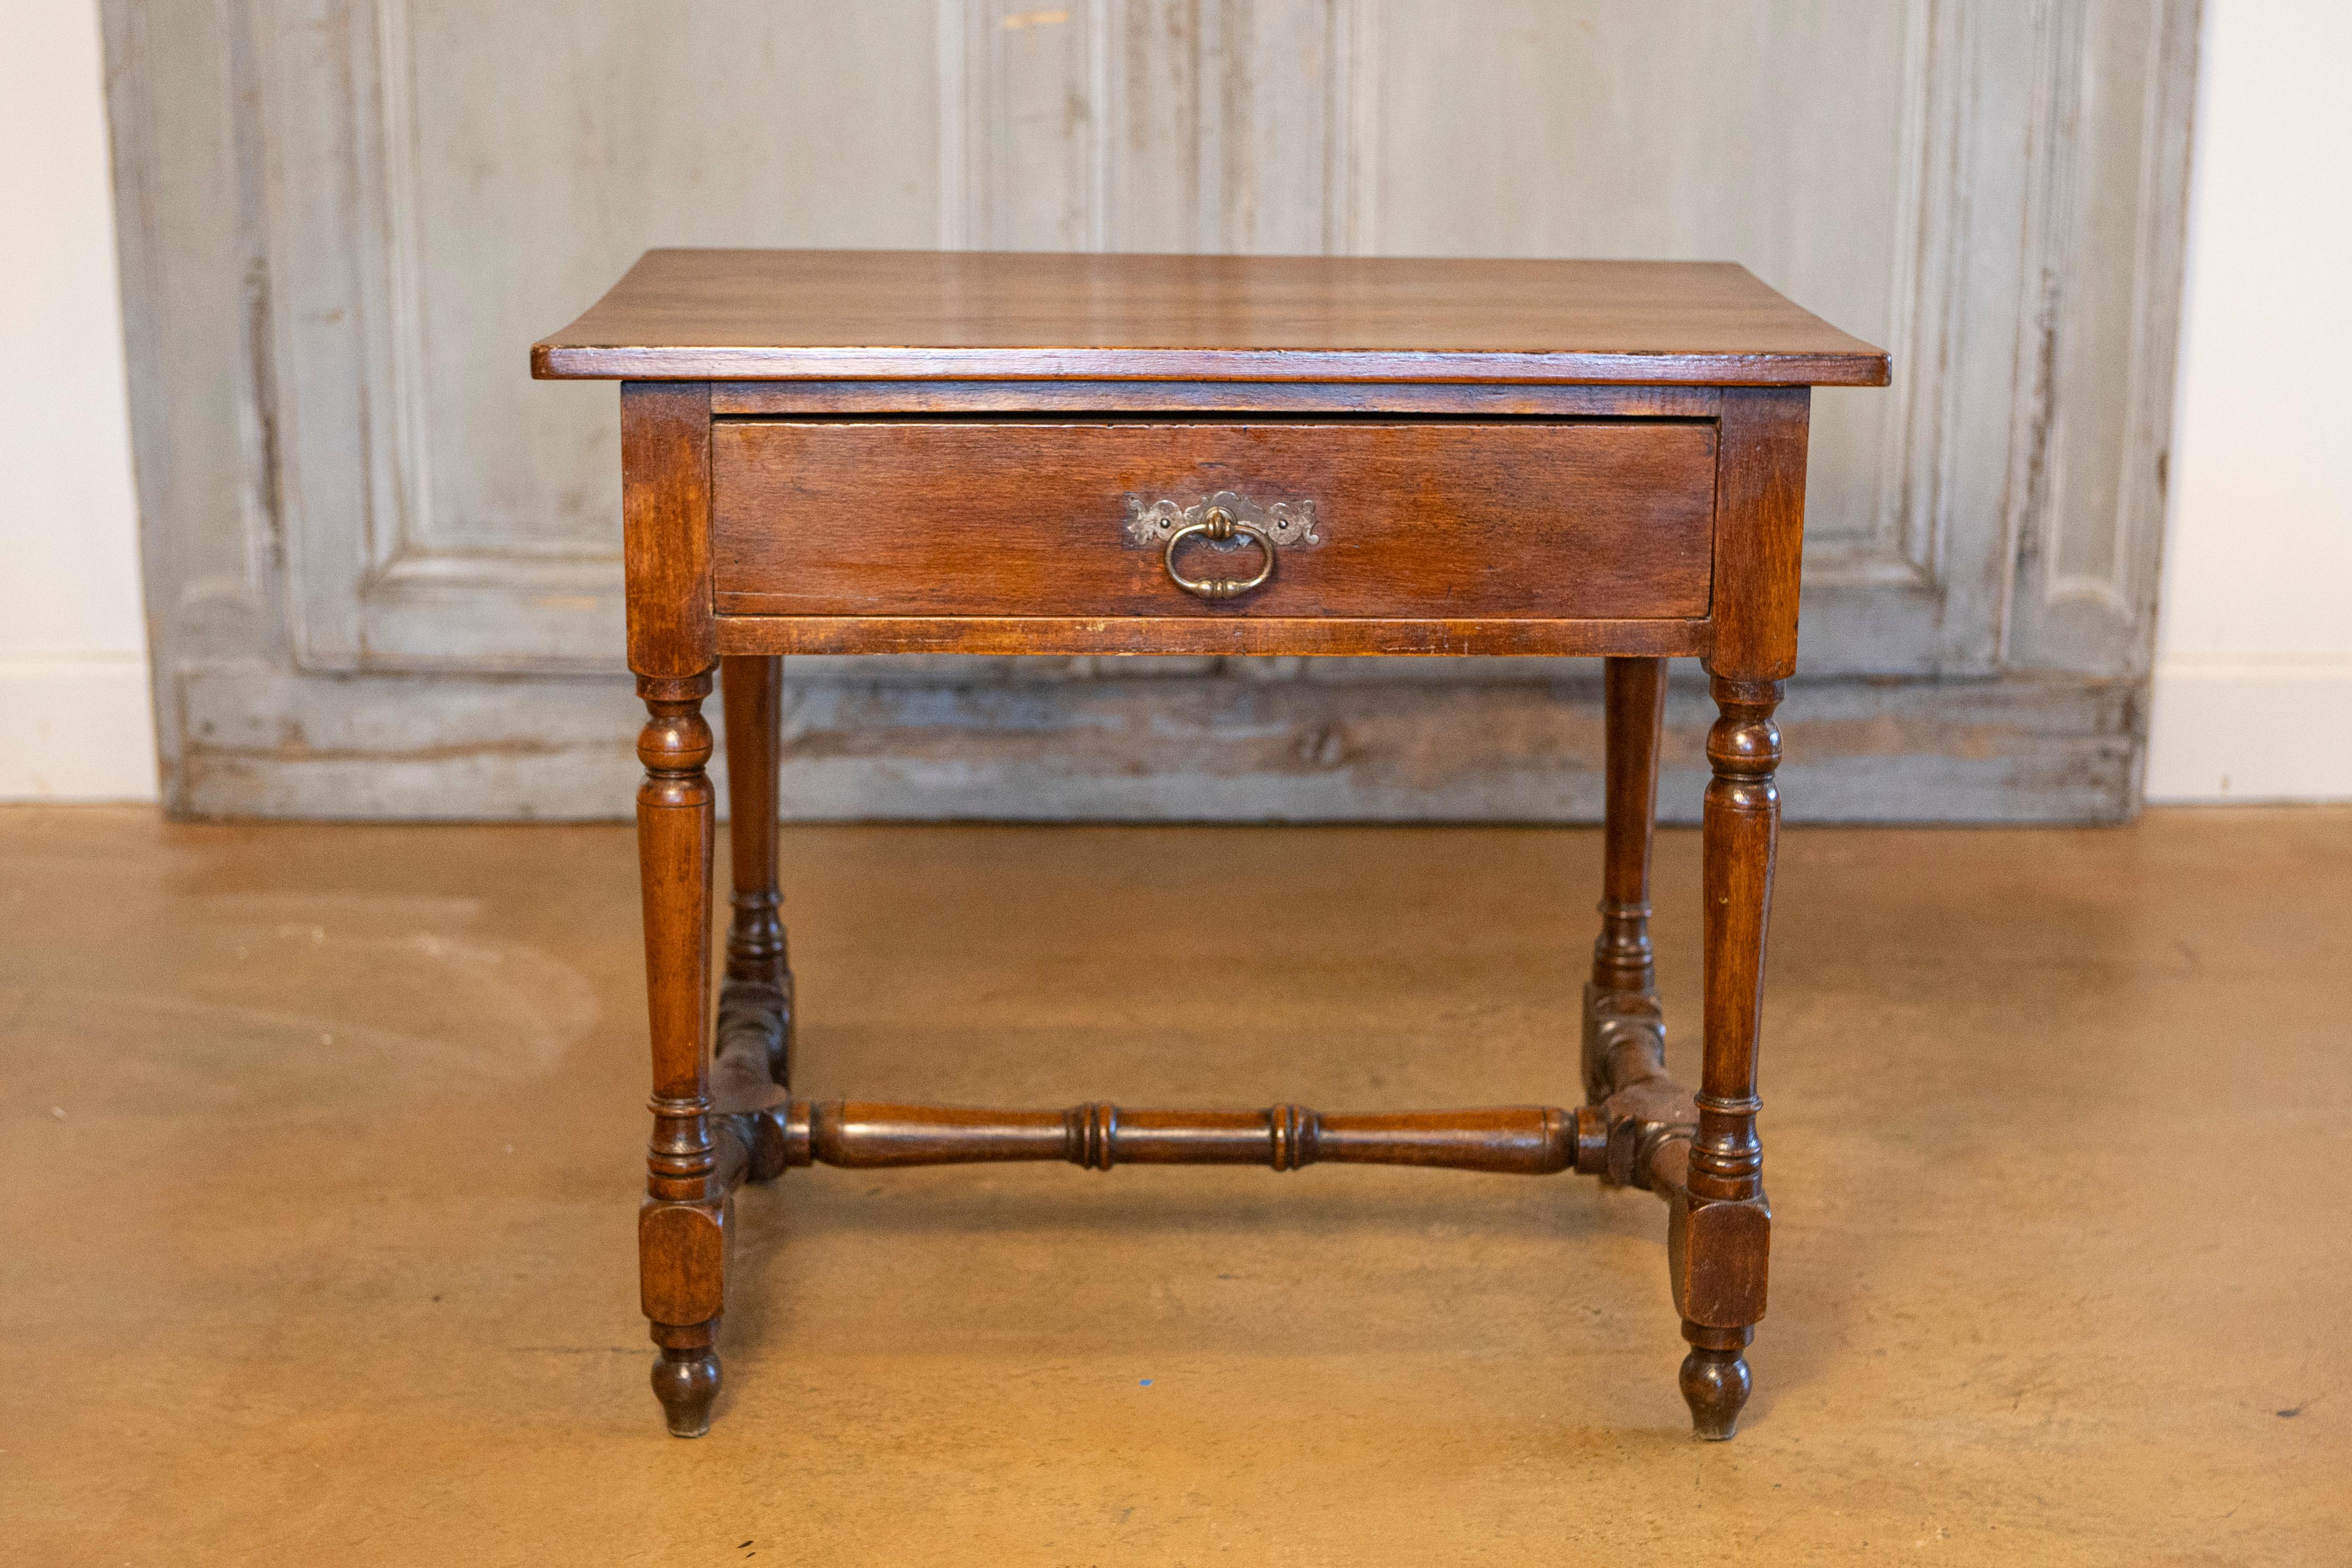 A French Louis XIII style side table from the late 19th century, with single drawer, turned base and H-form cross stretcher. Born in France during the later years of the 19th century, this Louis XIII style table features a rectangular top sitting